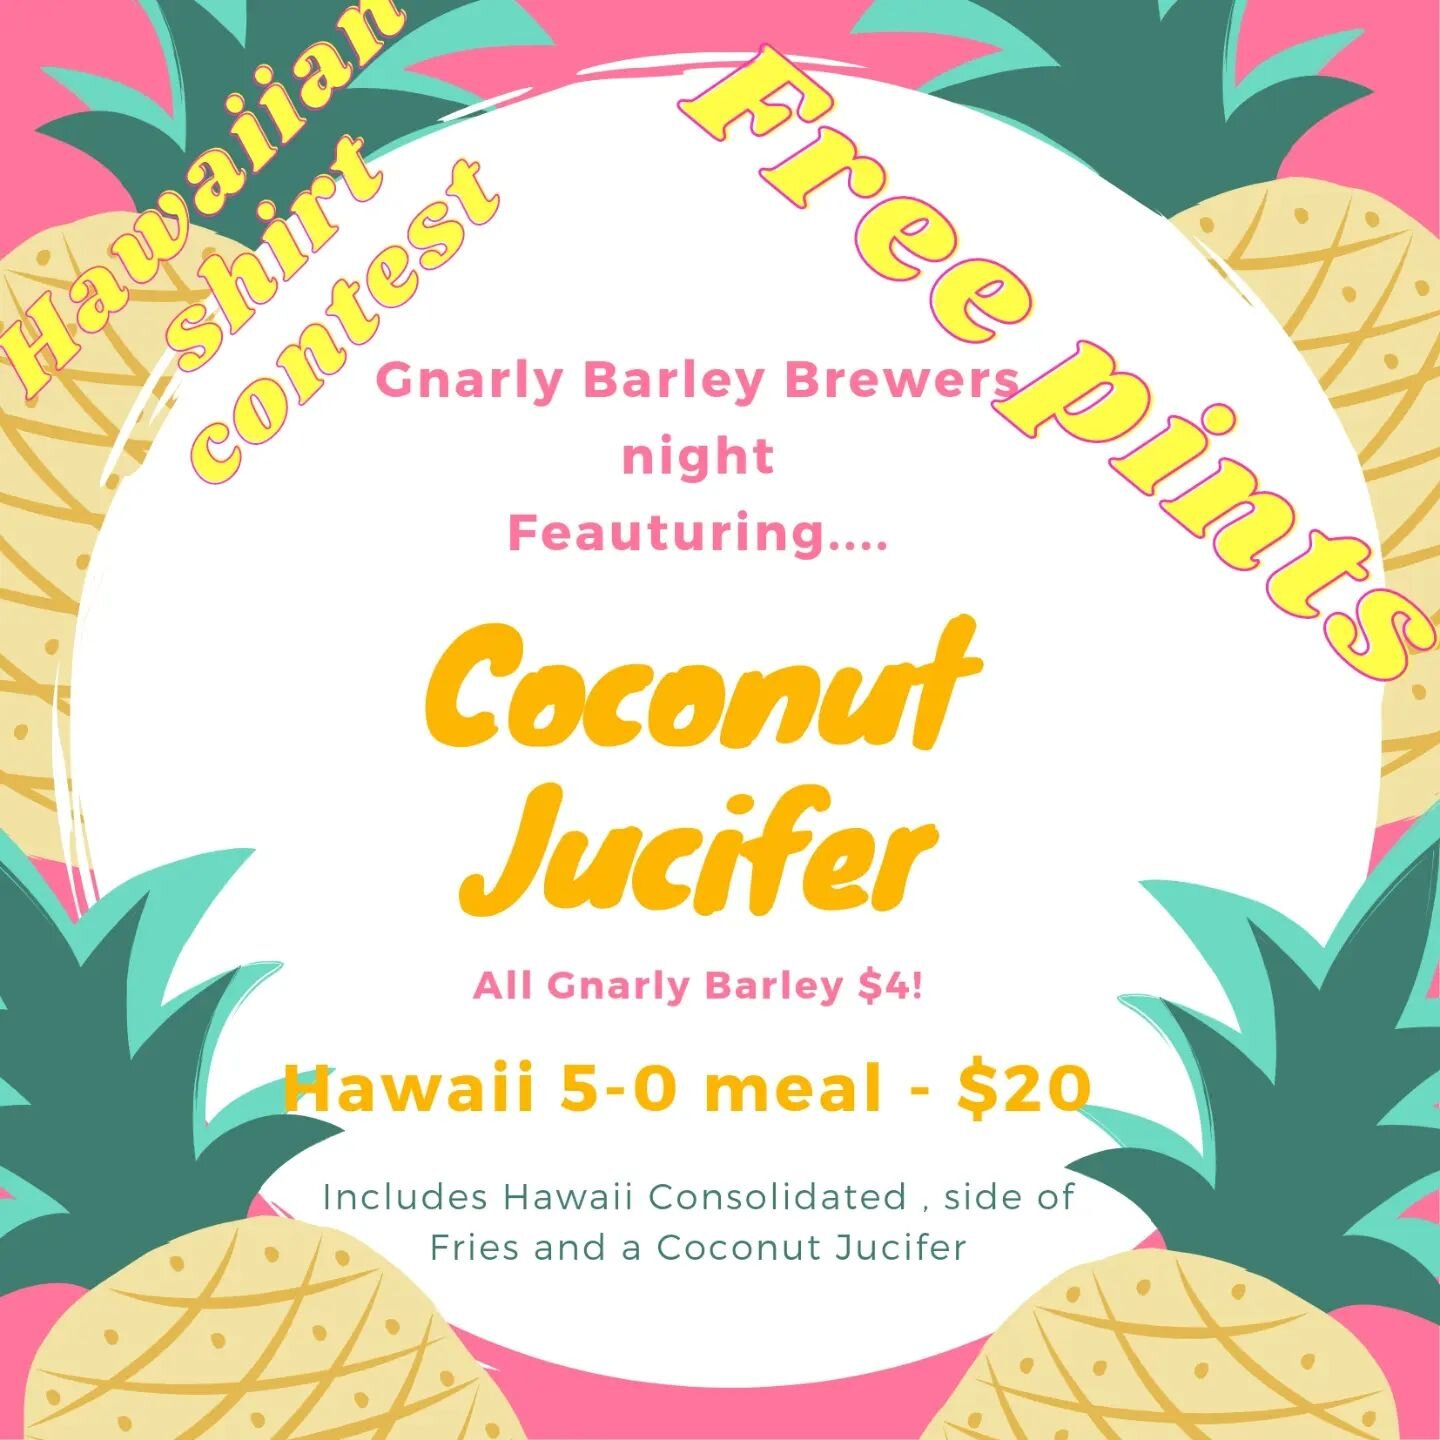 See y'all 5pm-9pm! With @gnarlybarley

#junction #bywater #gnarlybarley #burgers #craftbeer #jucifer #scratchkitchen #brewersnight #nola #frenchquarter #whattodo #foodnearme #showmeyournola #nolastyle #nolaeats #nolafoodies #drinkingnola